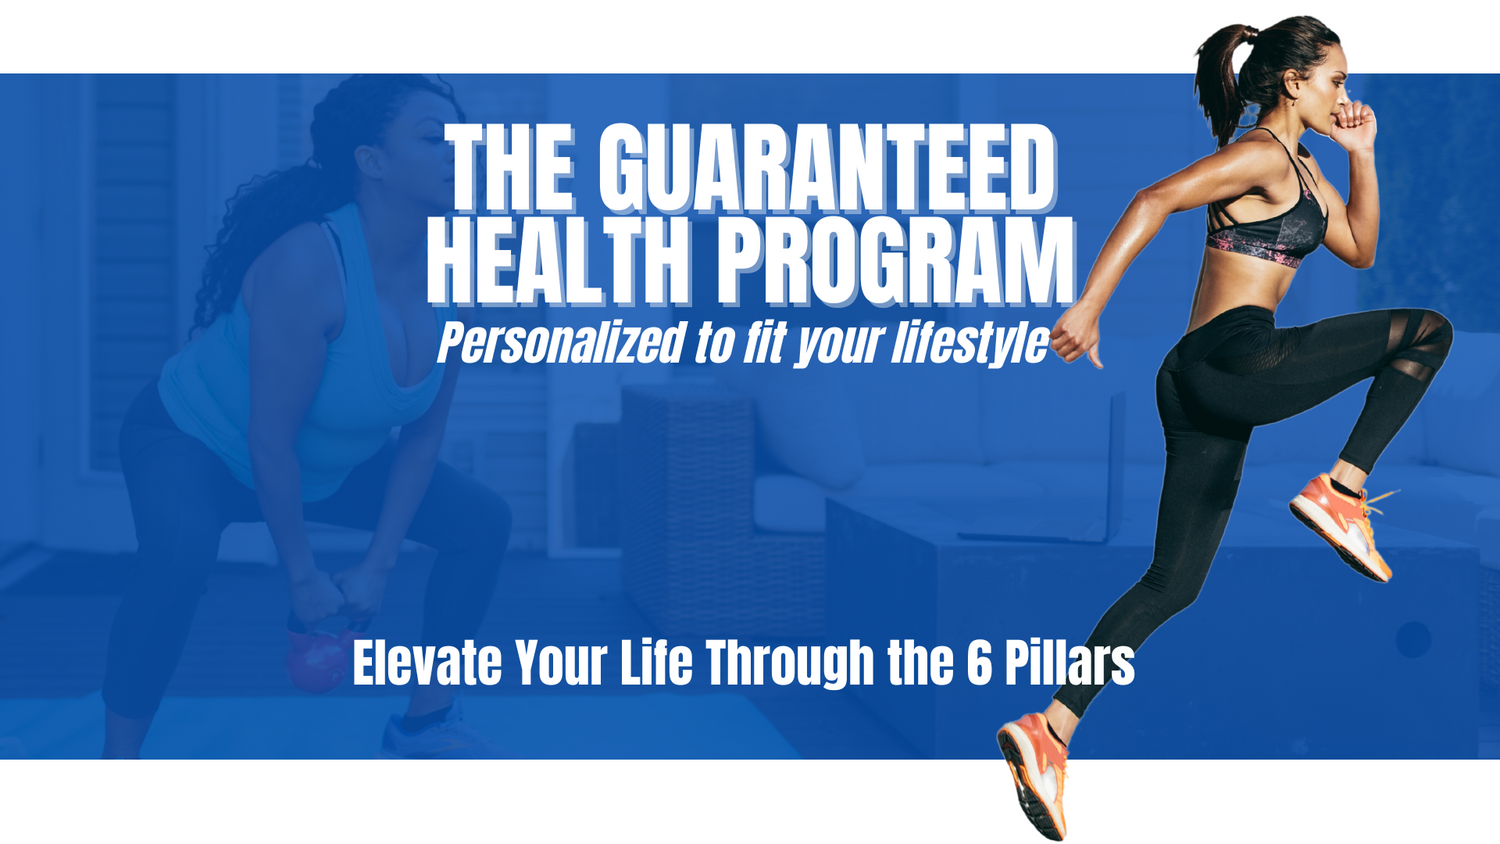 The Guaranteed Health Program is the personalized approach to fitness. This program focuses on the six pillars of health and well being including diet, fitness, hydration, sleep, and stretching 